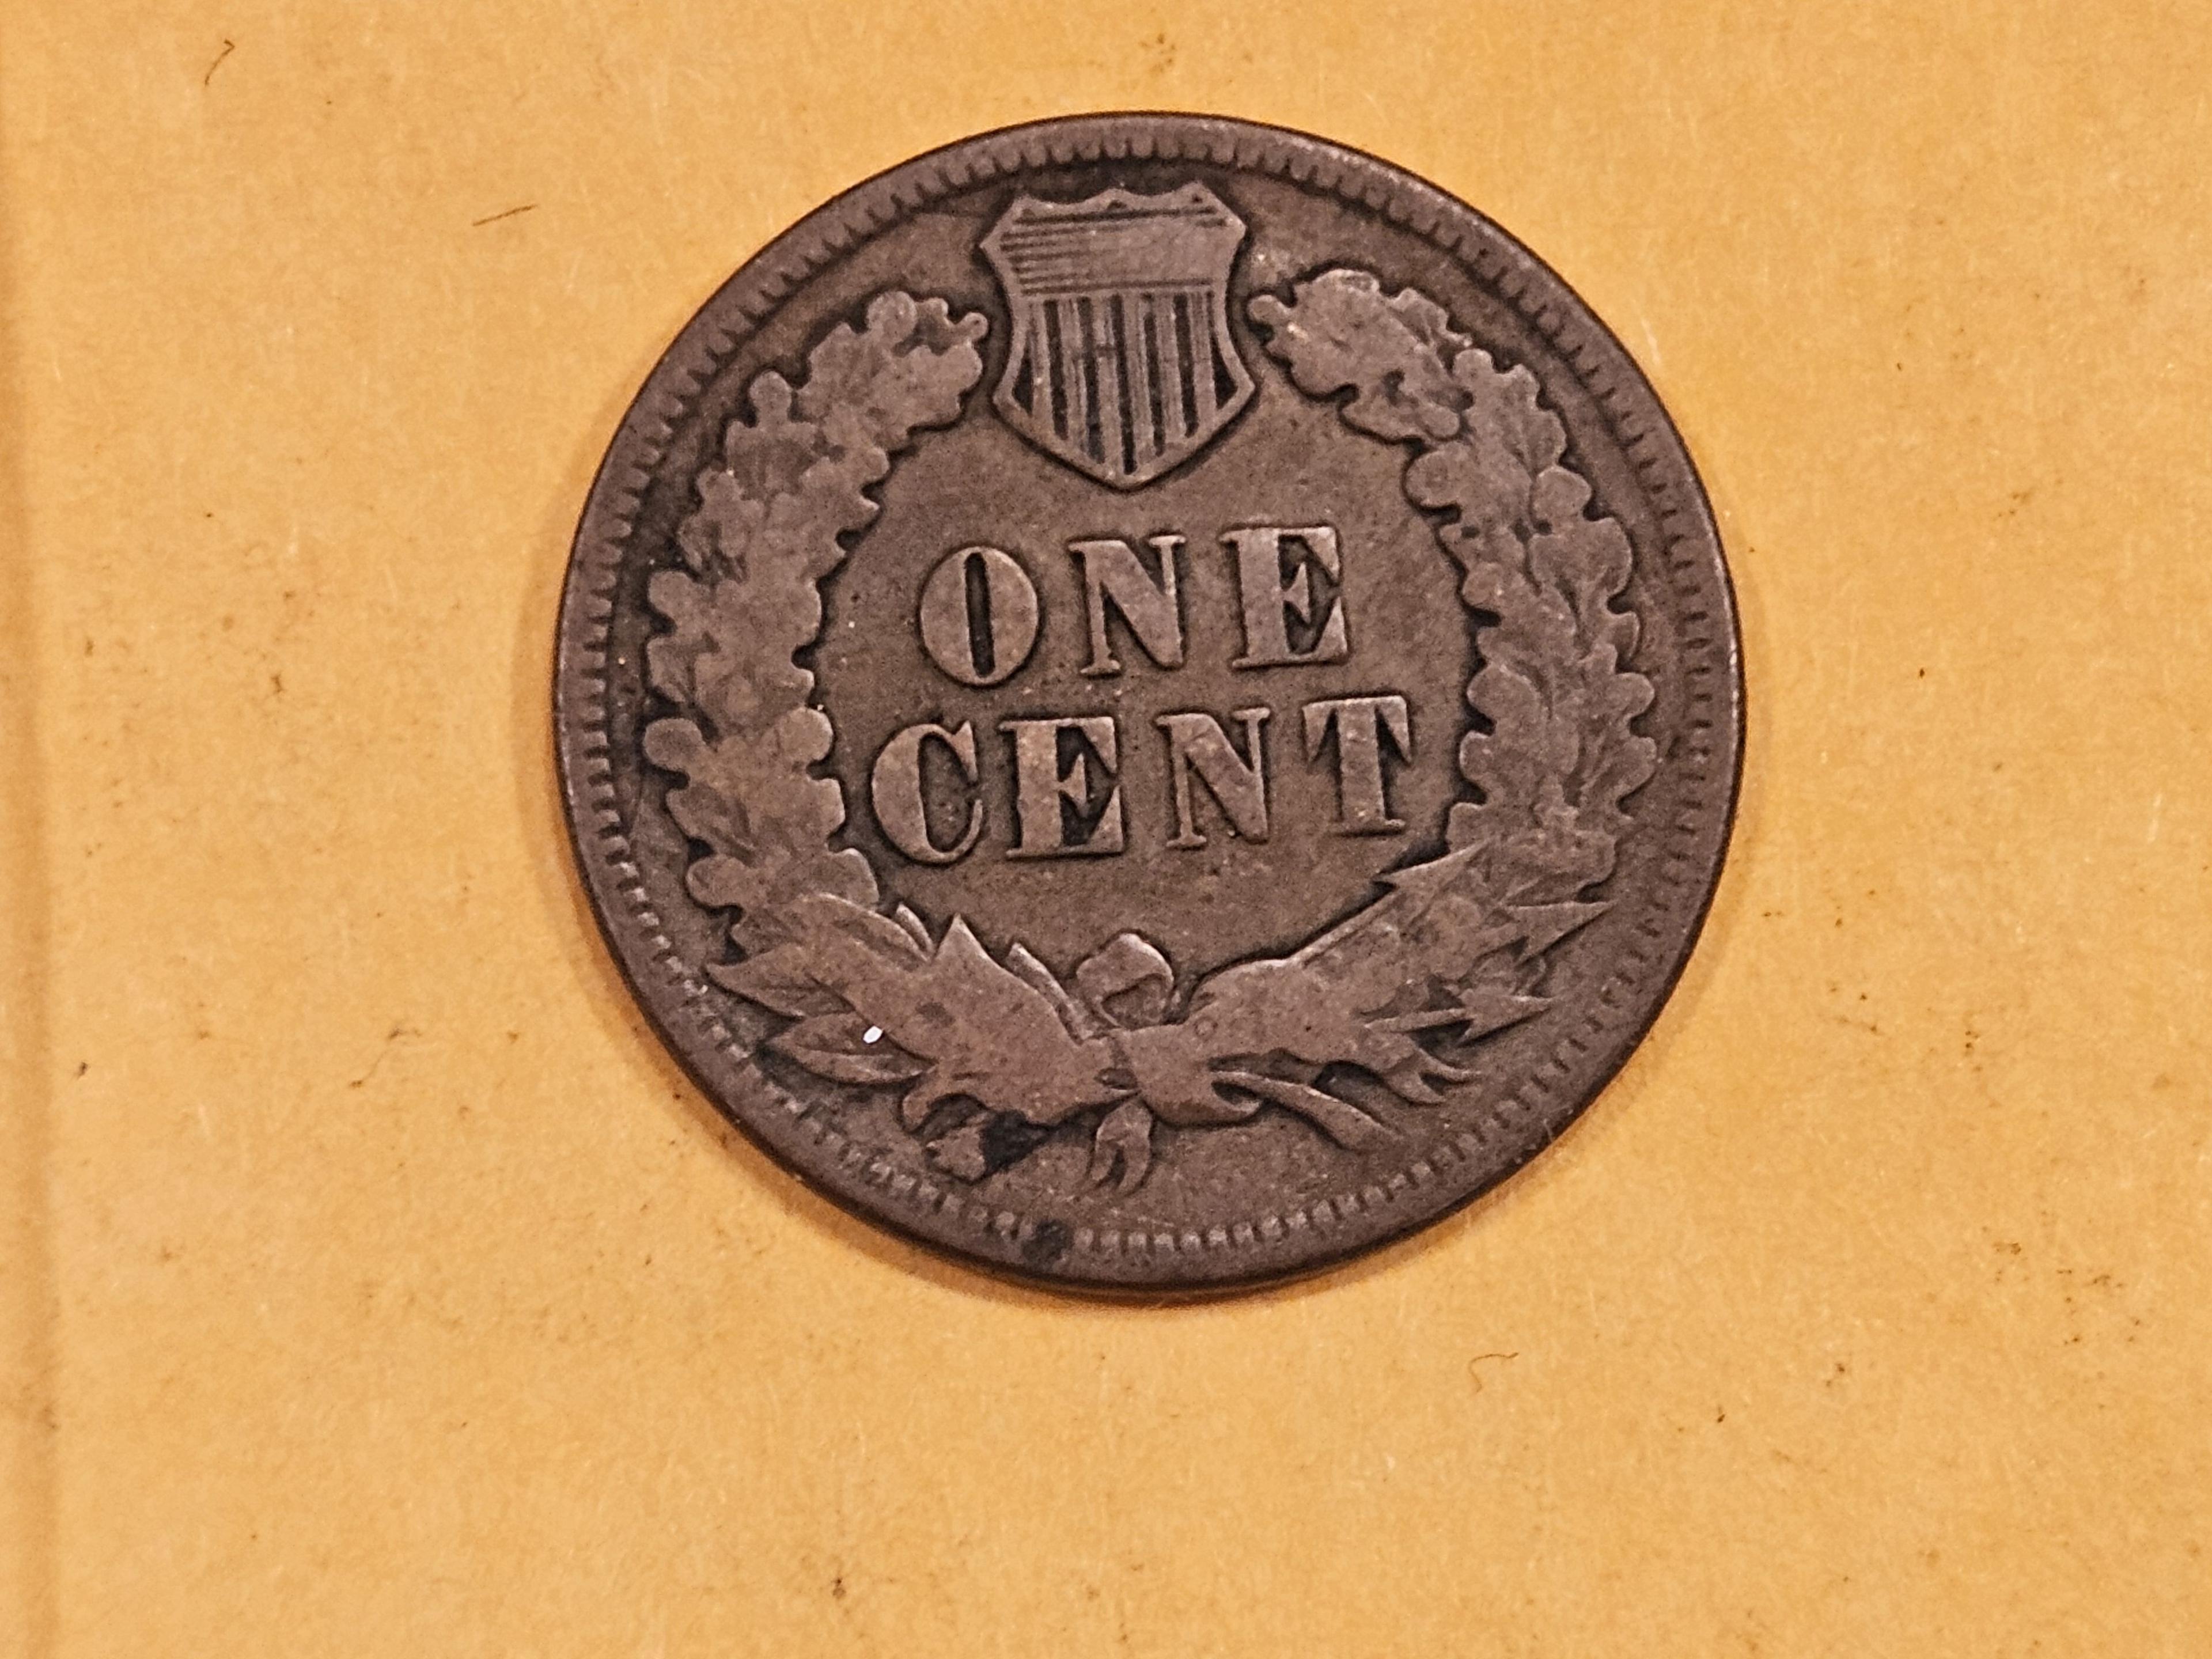 Better Date 1875 Indian Cent